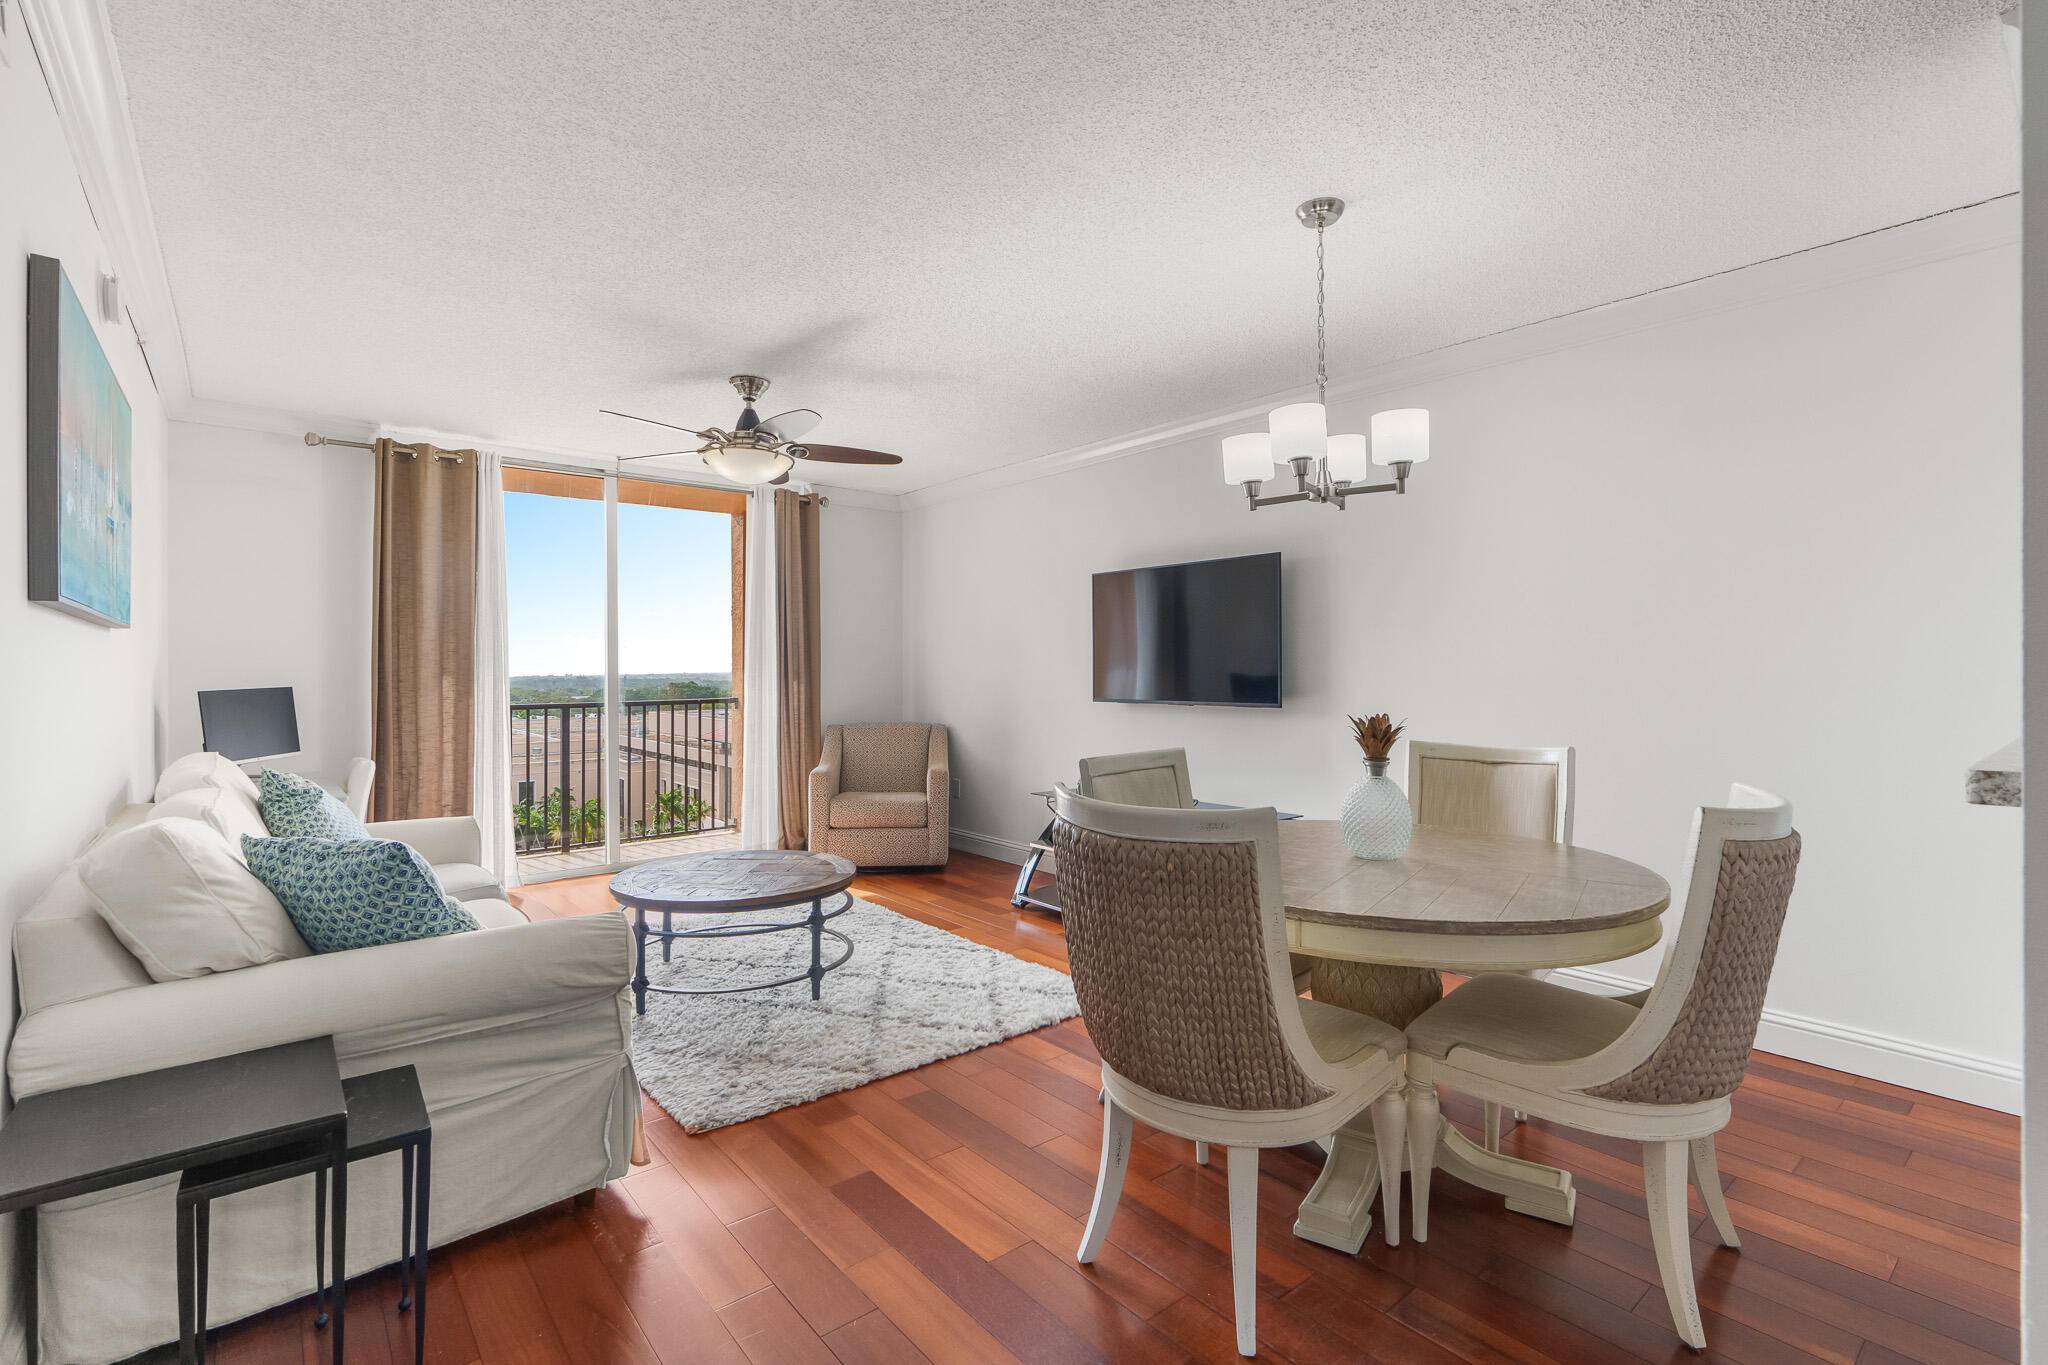 Discover elegance in this meticulously crafted one bedroom condo located in the heart of downtown West Palm Beach.